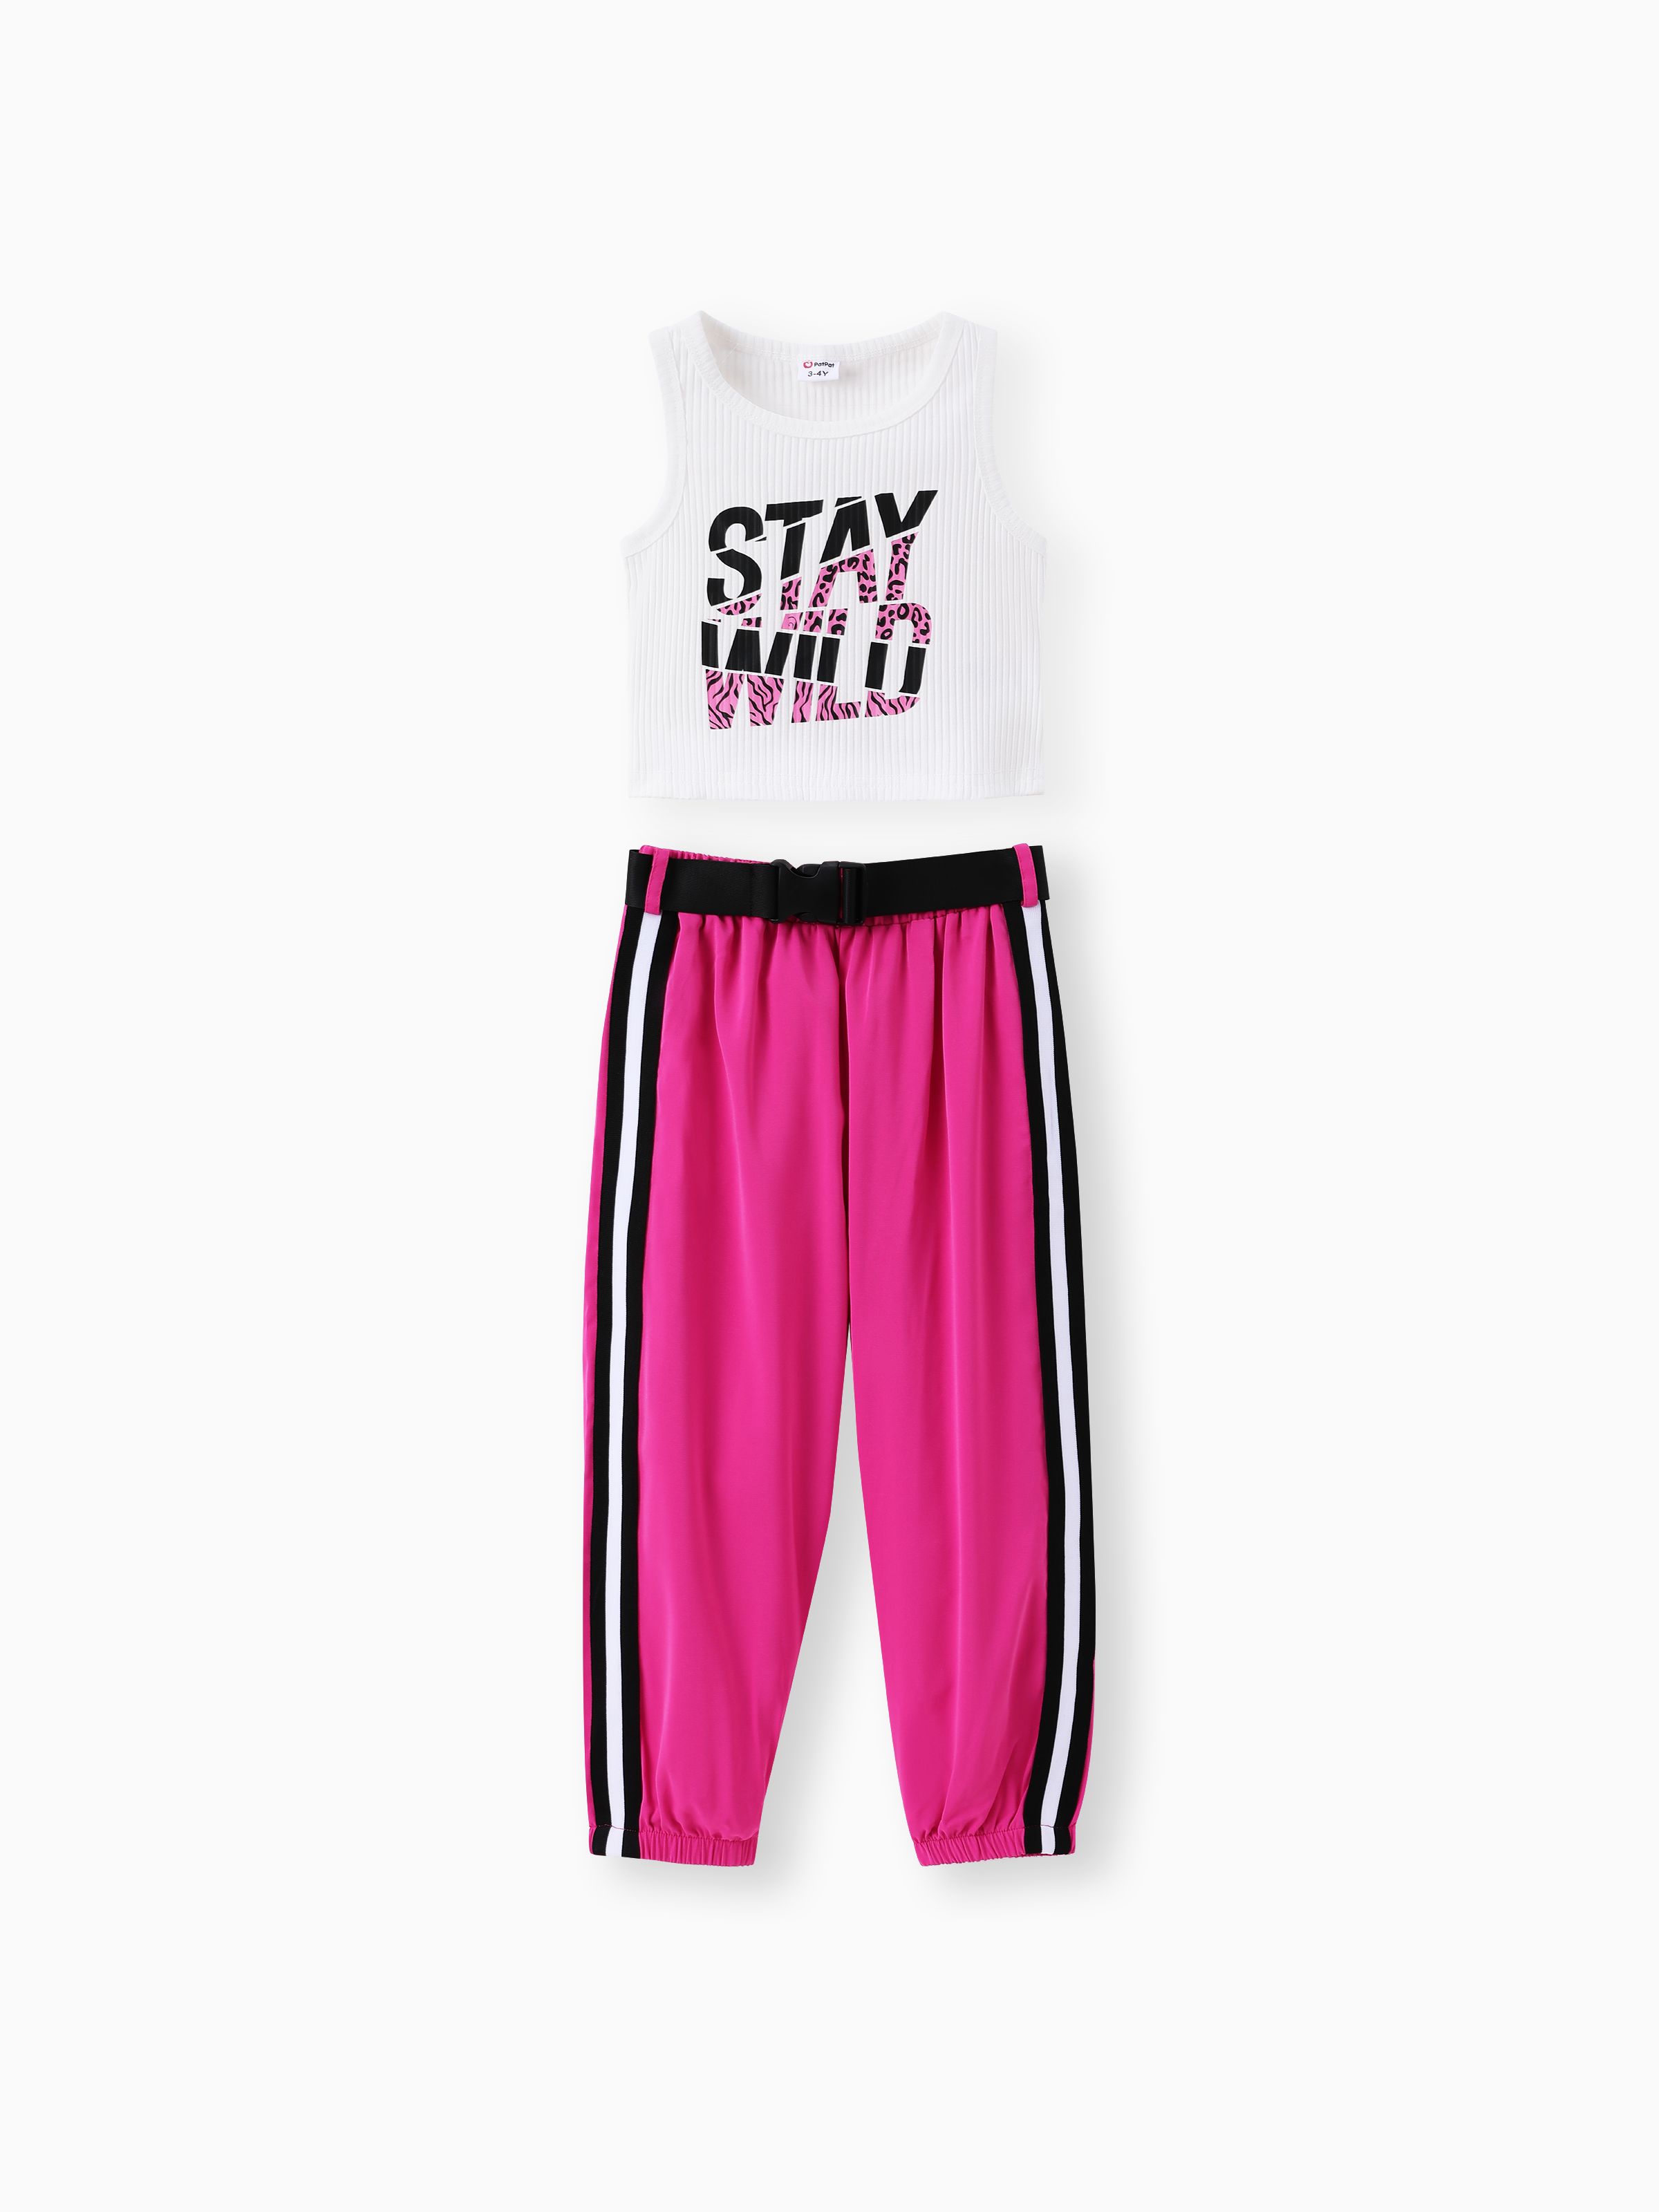 

Toddler Girl 3pcs Sporty Letter Print Tank Top and Sweatpants with Belt Set